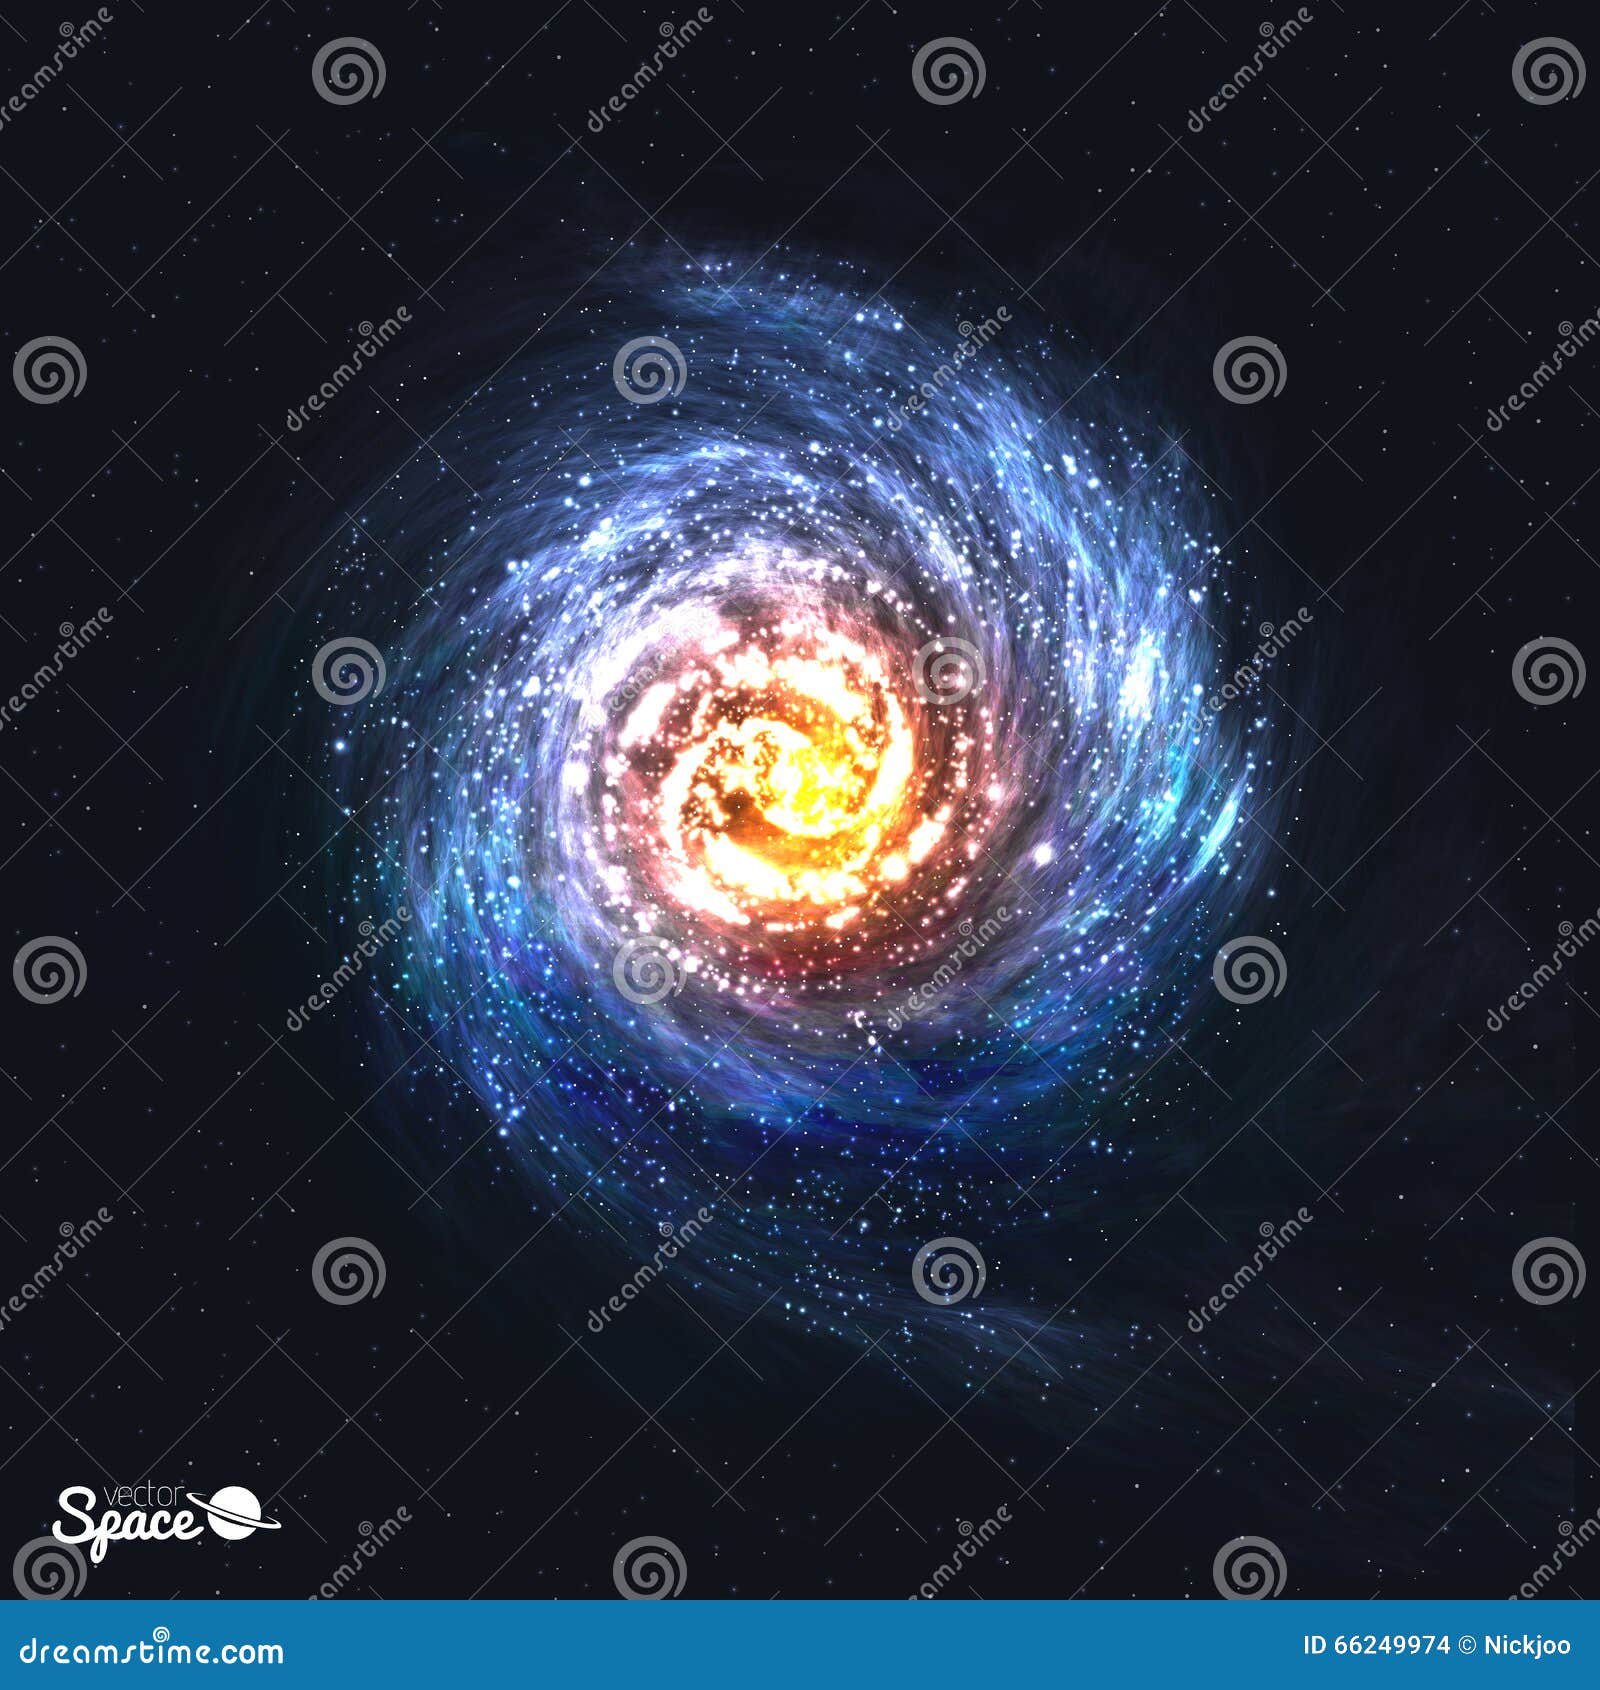 Colorful Realistic Spiral Galaxy on Cosmic Background. Vector